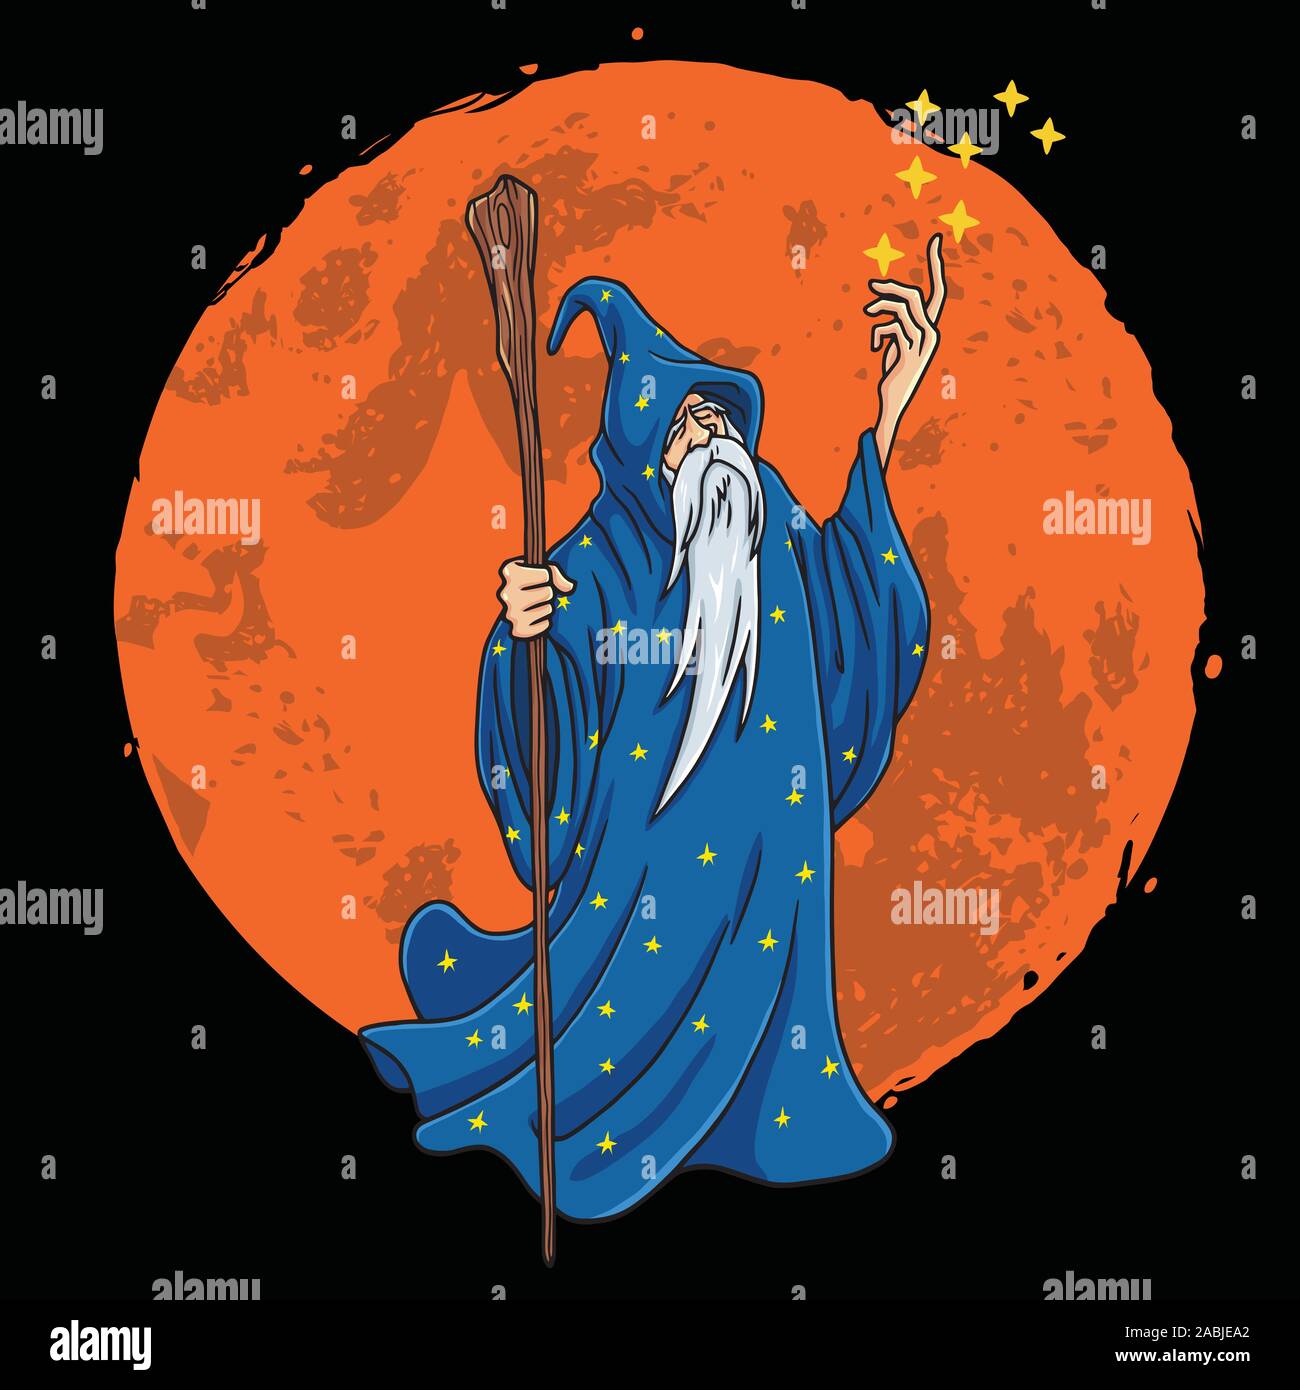 Wizard with Blue and Stars Clothes Character Design Cartoon with Moon Background Vector Illustration Stock Vector